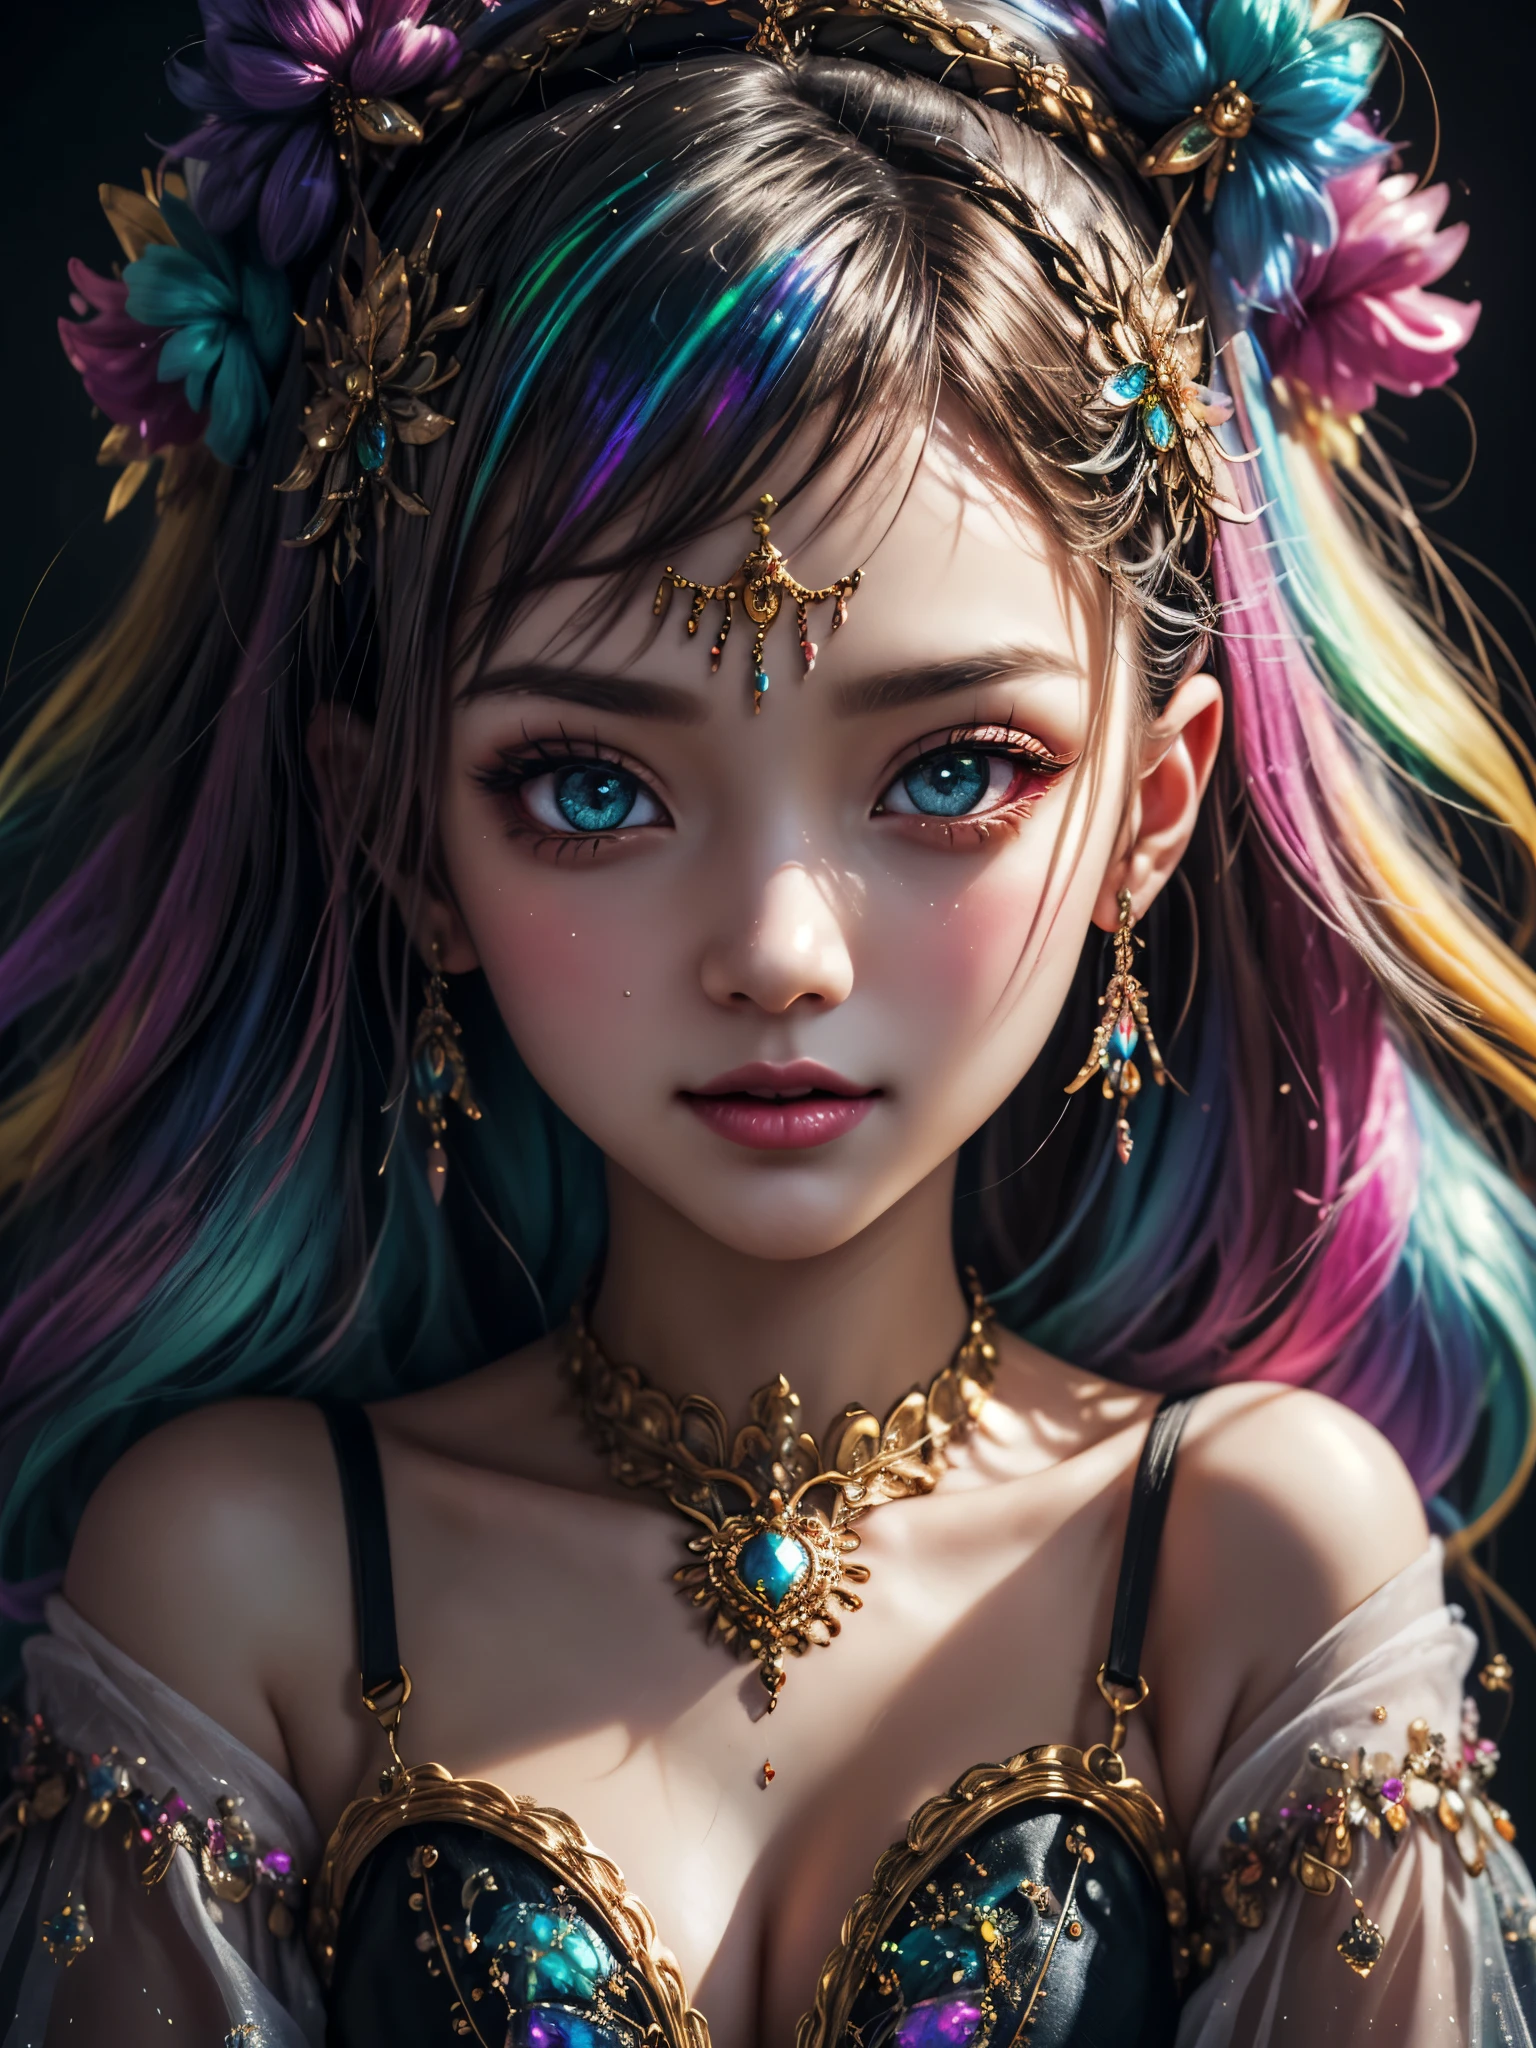 this artwork should be colorful and evoke feelings of euphoria and ecstasy. generate a beautiful fantasy woman with an interesting and dynamic manic expression. the woman is dressed in the style of harajuku decora fashion. there are many intricate and highly detailed decora fashion accents. clothing is ornate and extravagant with contrasting colors, textures, and patterns. include strong influences from lisa frank. include many awe-inspiring fantasy elements. ((include phantasmal iridescence, crystals, bumps, and rainbow colors that drip like paint through the artwork.)) rainbow paint should drip through hair and onto face and body. pay particular attention to a beautifully detailed face with realistic shading. include 8k eyes, highly detailed eyes, realistically detailed eyes, macro eyes, bright eyes. the overall feeling of this artwork should be happiness and excitement. the artwork should be highly ornate. impress me. the artwork should be highly creative and ultra ornate. include many decora decorations and accessories. (fantasy00d), high quality, highres, detail enhancement